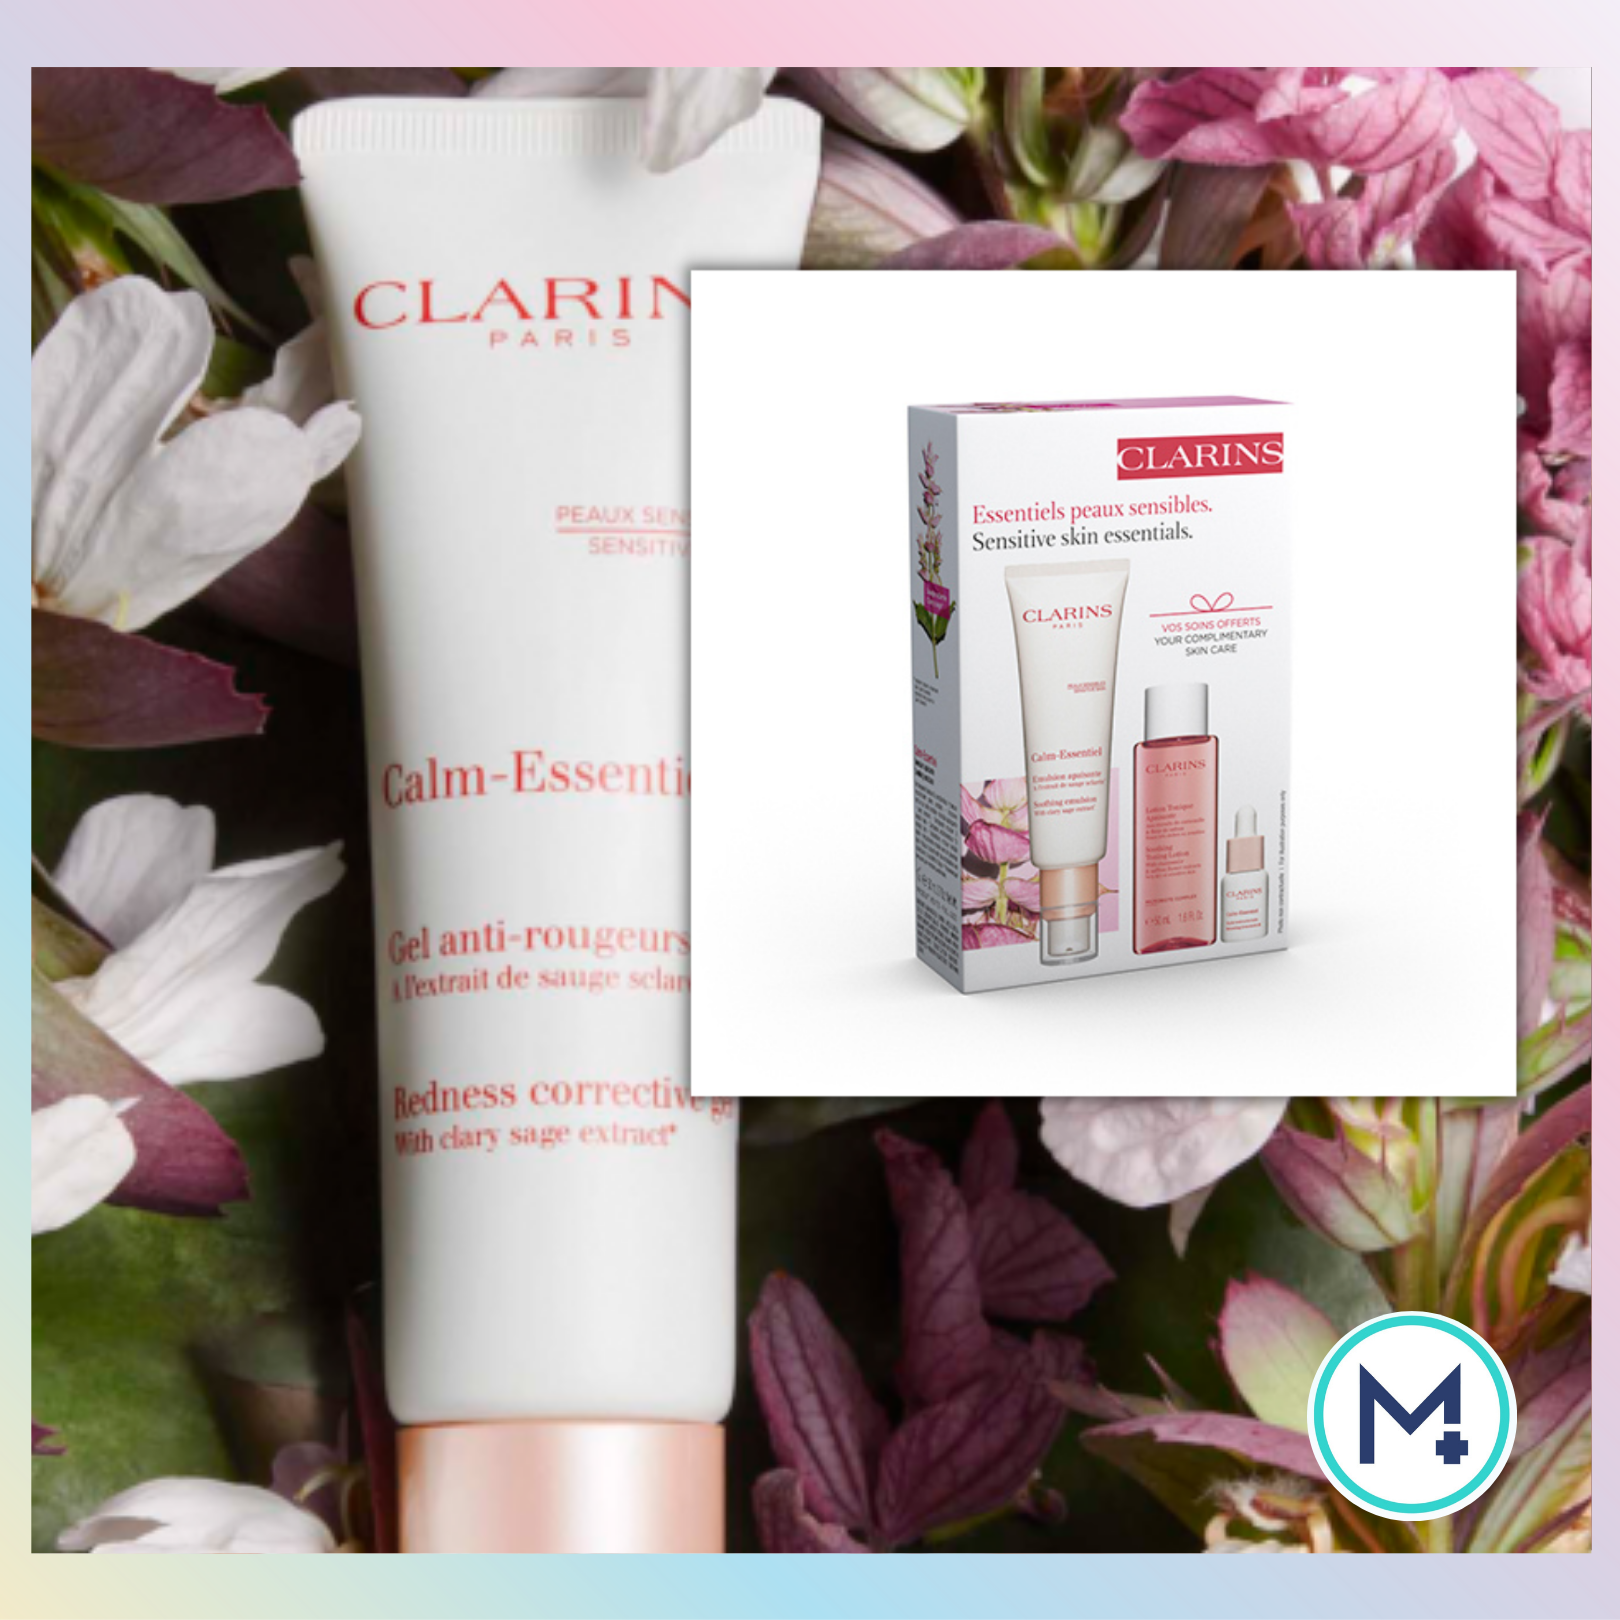 Clarins Gift of Beauty Offer | Margaret Balfour Clarins Beauty Salon & Day  Spa | Sherborne Dorset